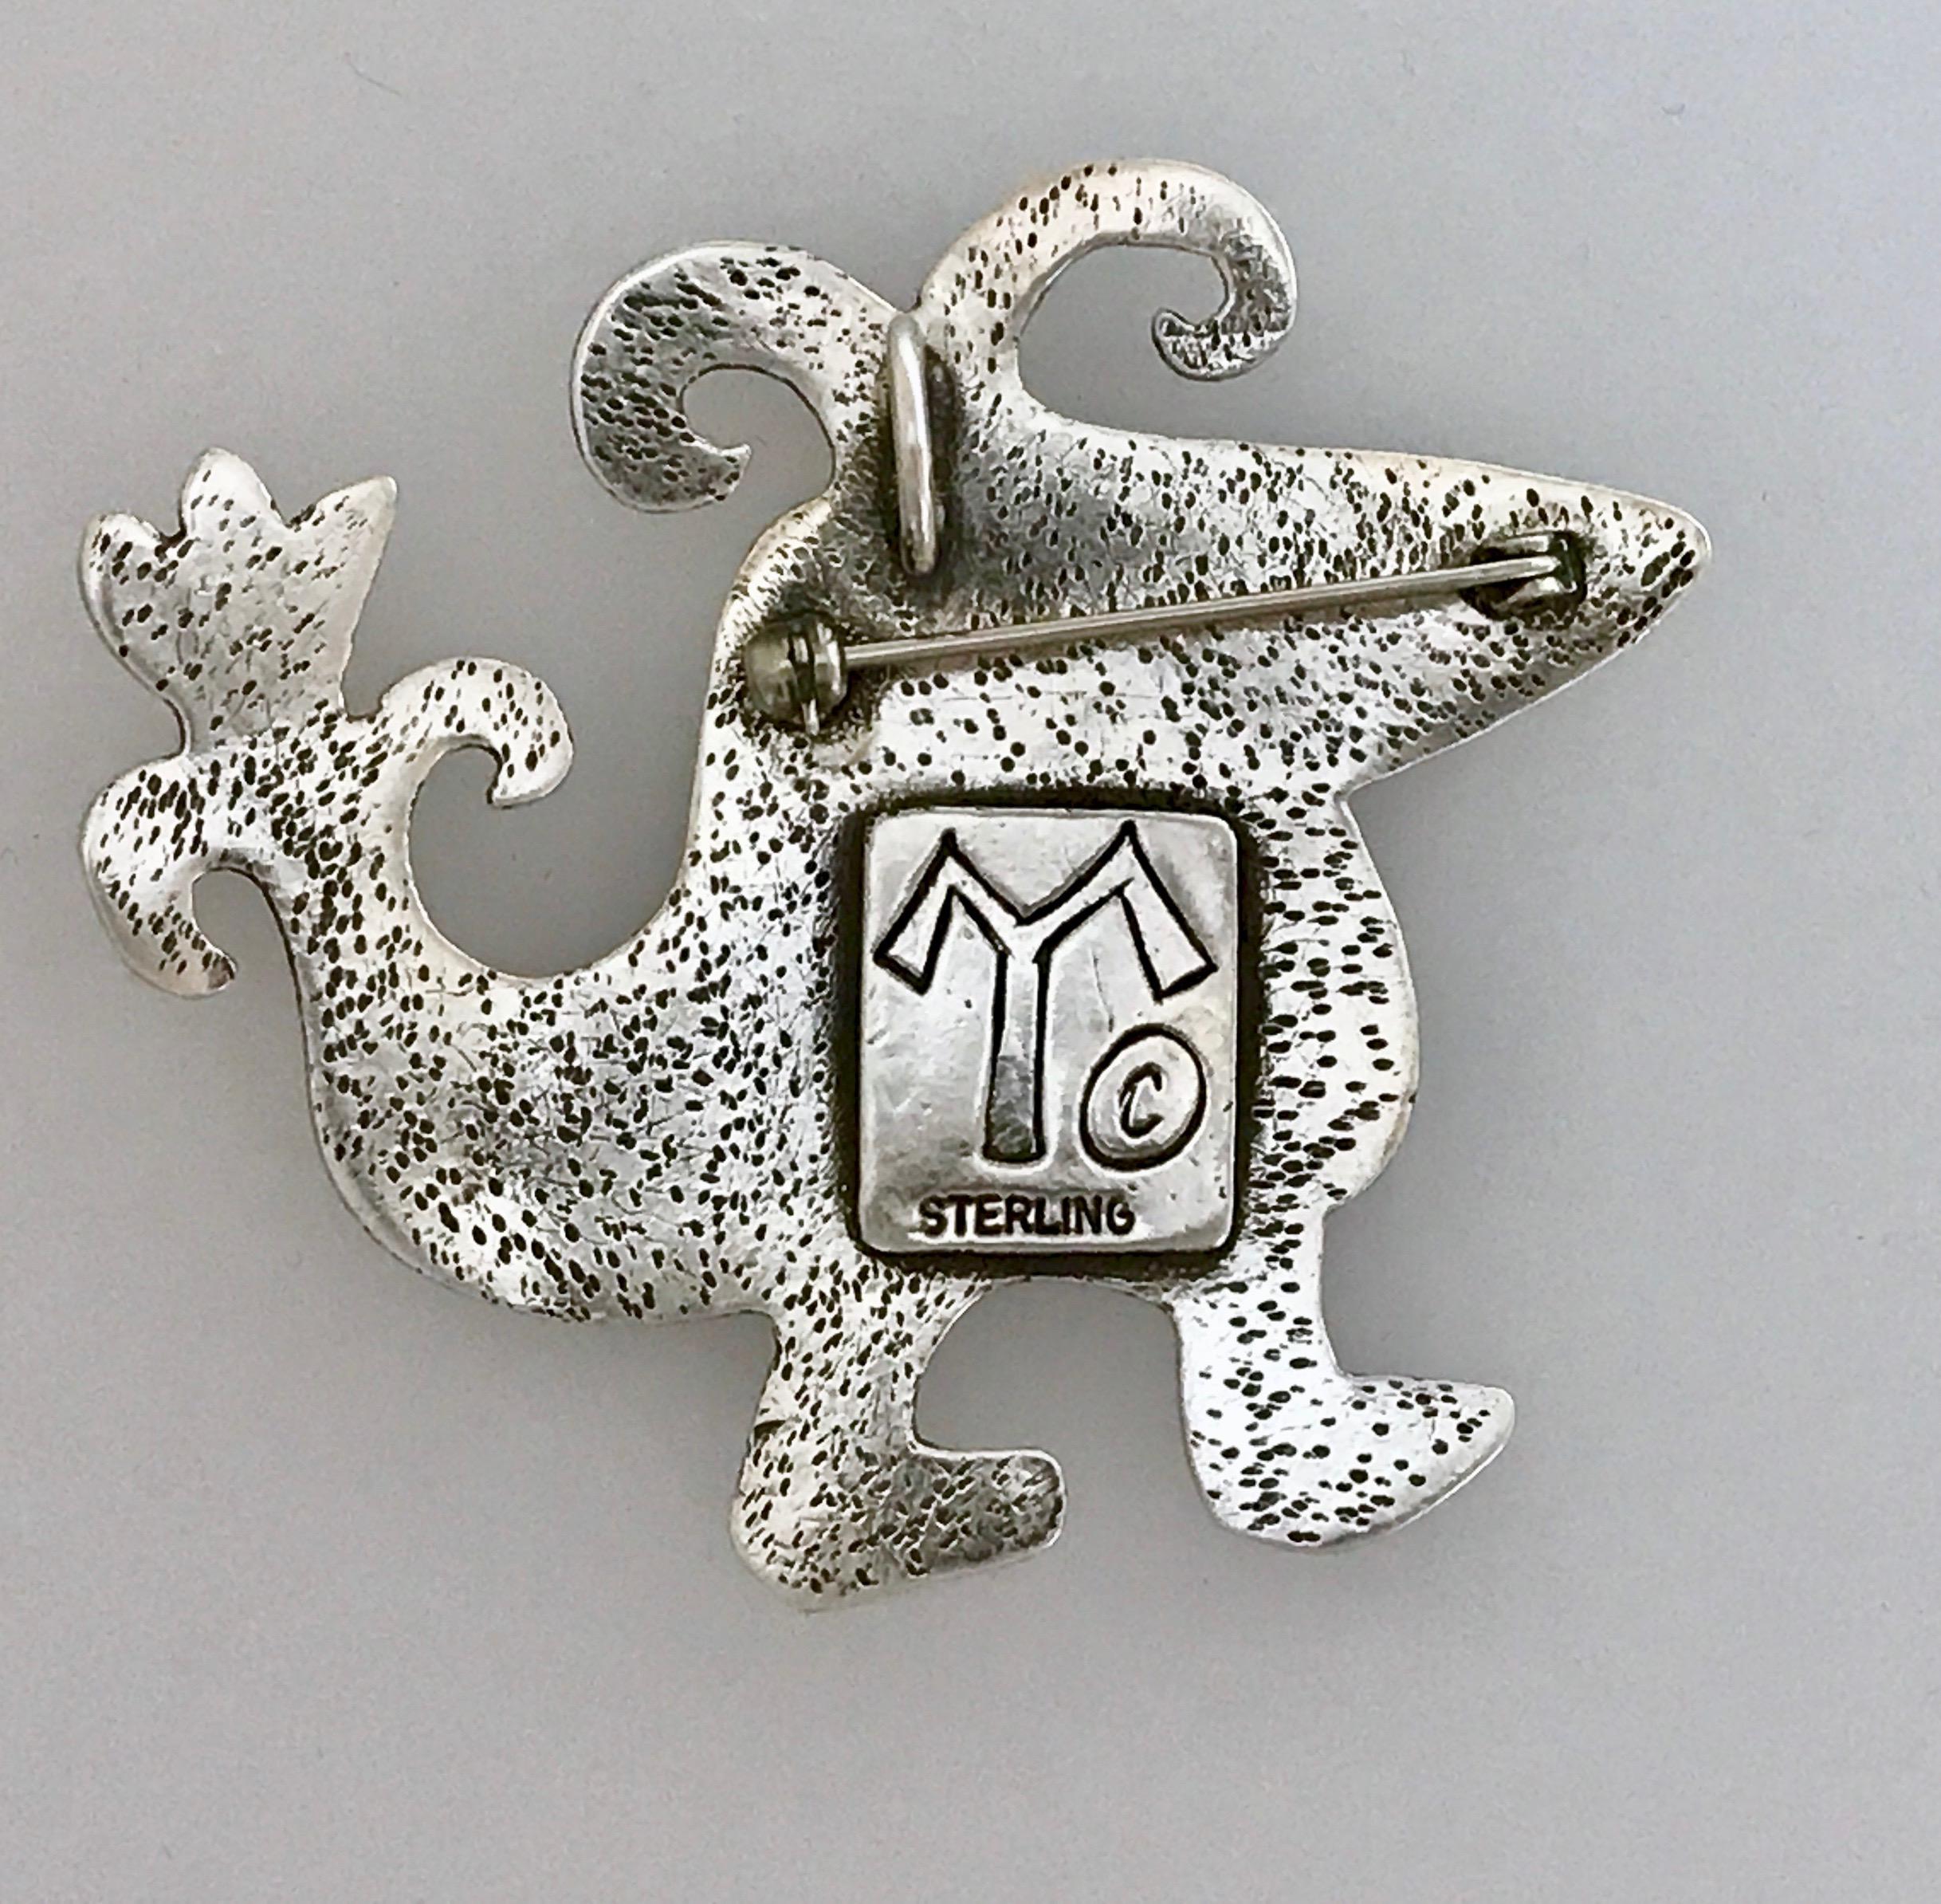 Little Jack, cast silver pin pendant bird dragonfly Melanie Yazzie 

Melanie A. Yazzie (Navajo-Diné) is a highly regarded multimedia artist known for her printmaking, paintings, sculpture, and jewelry designs.

She has exhibited, lectured, and